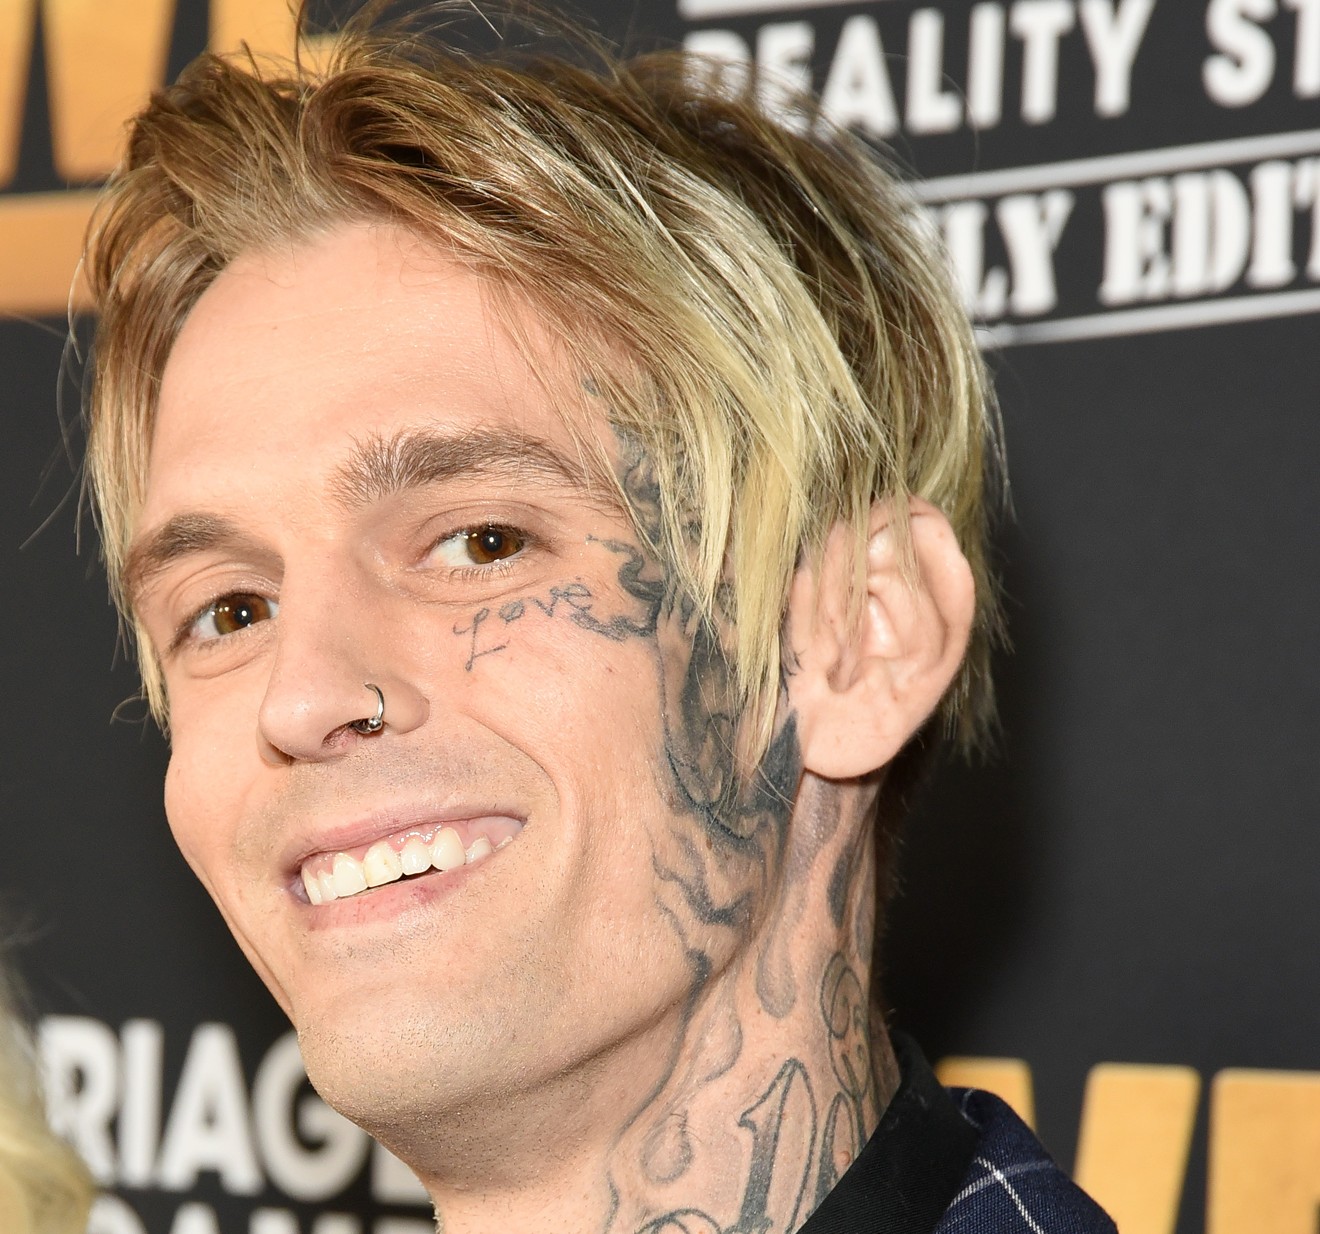 Aaron Carter is taking his girlfriend to court against defamation